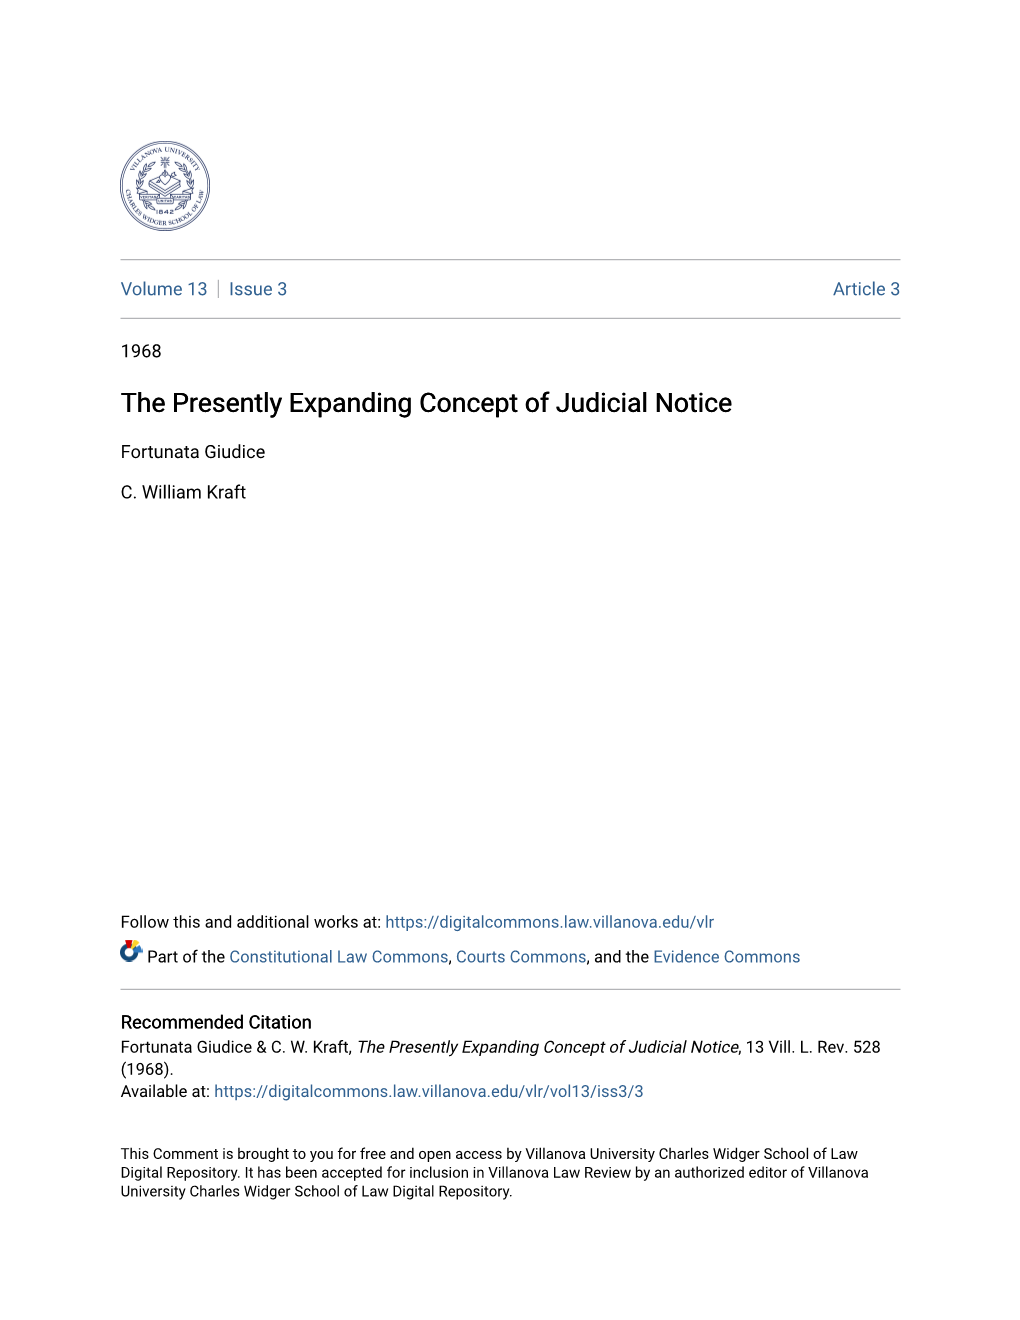 The Presently Expanding Concept of Judicial Notice